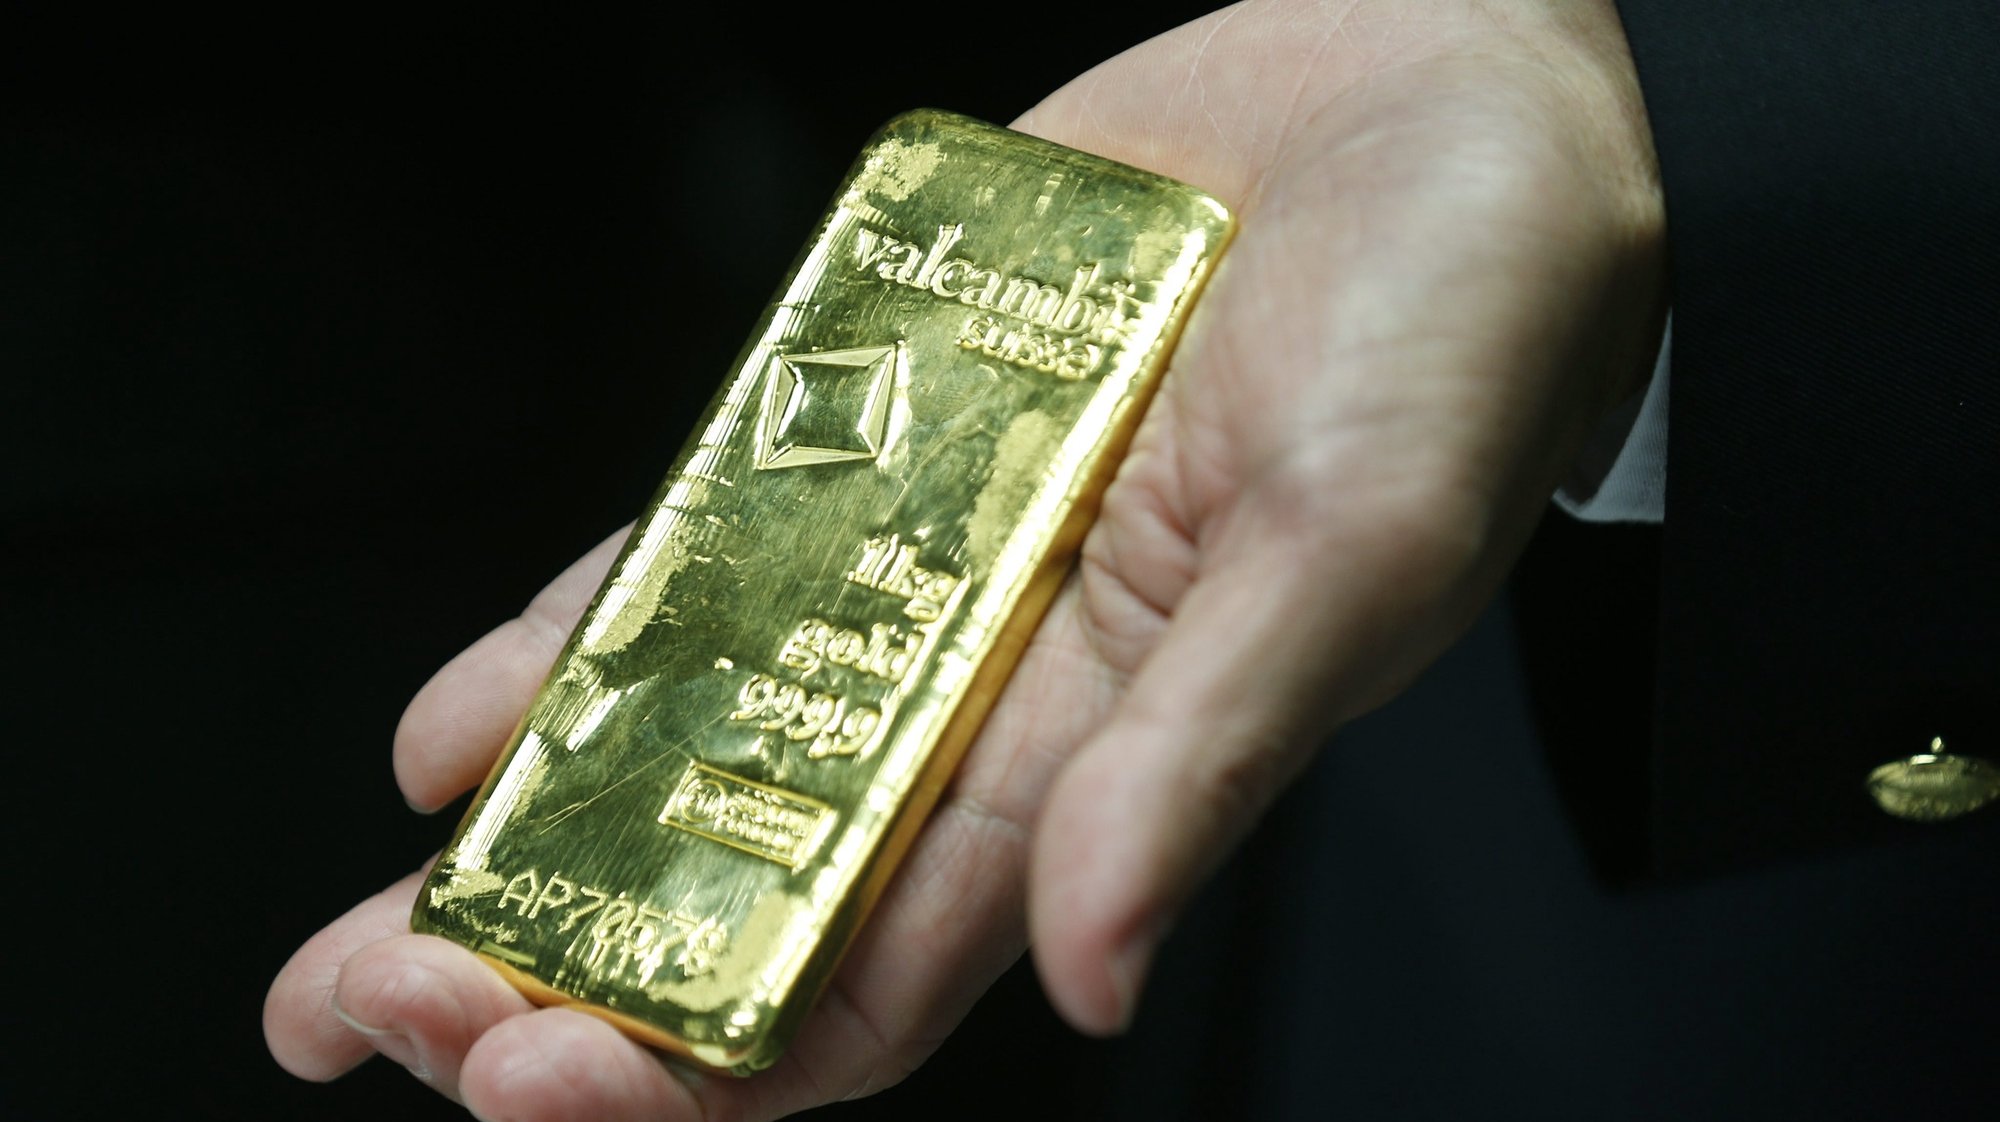 epa04295276 A Thai customs officer displays a 12kg gold bar seized from a South Korean man during a press conference at Customs Department in the Suvarnabhumi International Airport, Bangkok, Thailand, 02 July 2014. Thailand&#039;s customs officers arrested a South Korean man, identified as Park Sukman, 67, with 12kg gold bars while allegedly attempting to take the bars out of the country. The suspect had already been cleared for boarding a flight to Seoul on late night 01 July, Thai officials said.  EPA/NARONG SANGNAK